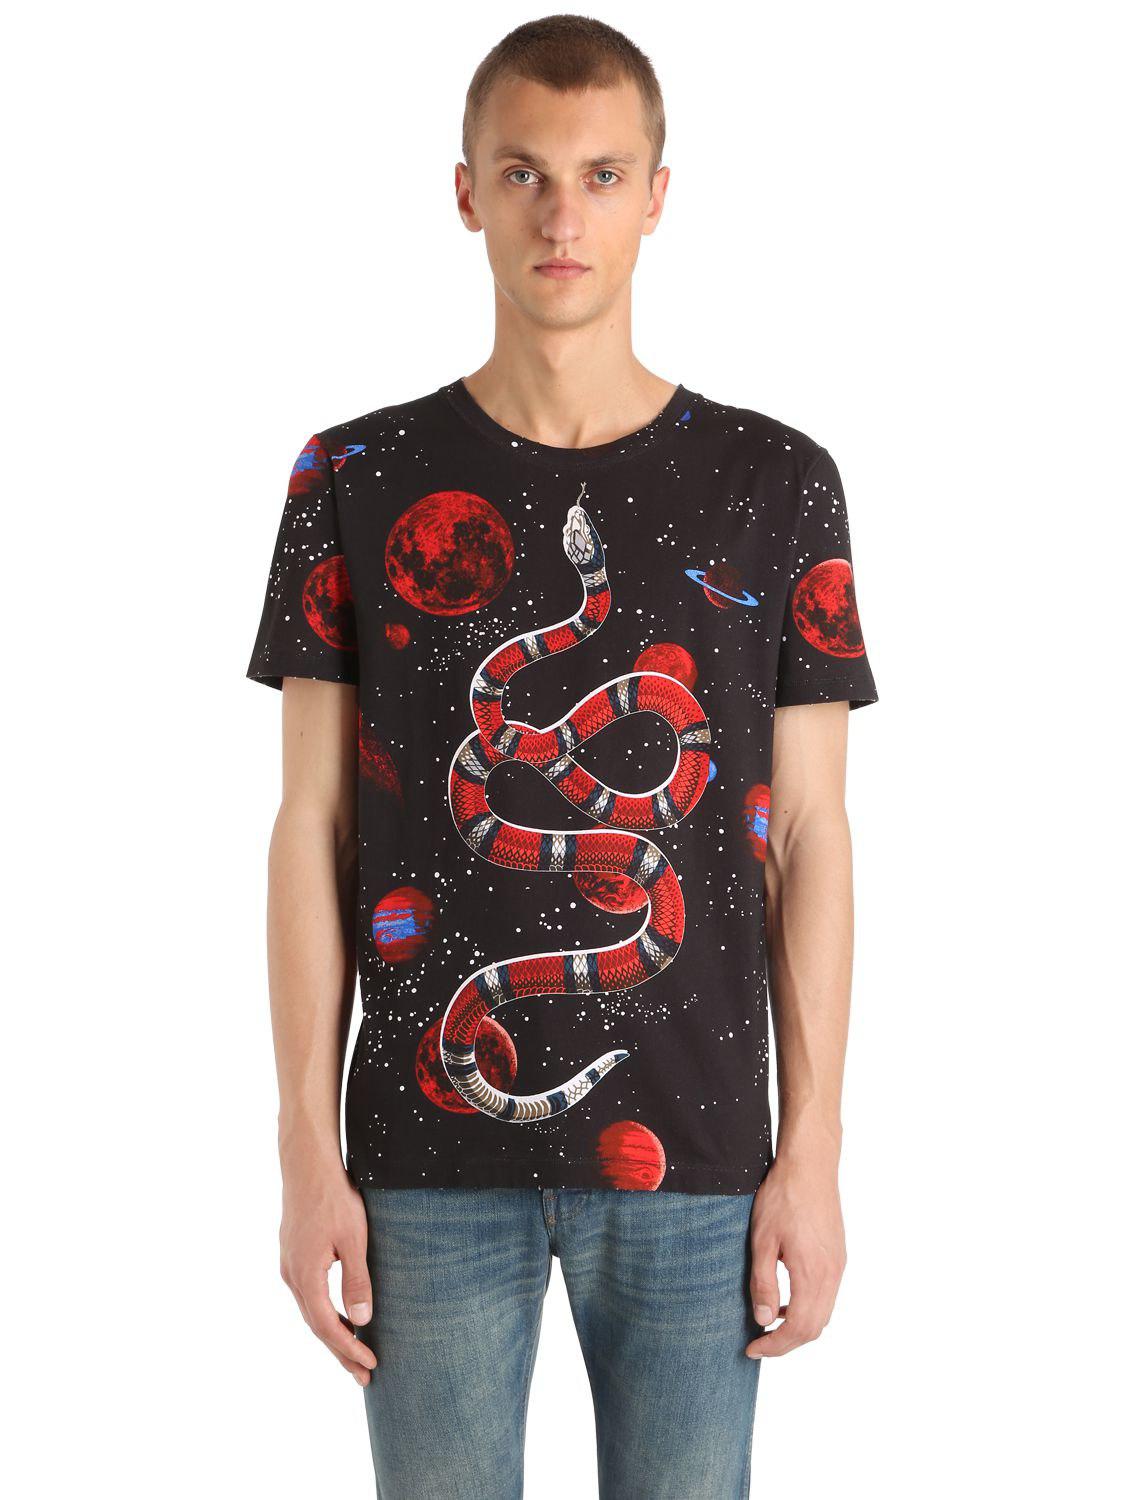 Gucci Space Snake-print Cotton T-shirt in Black for Men - Lyst